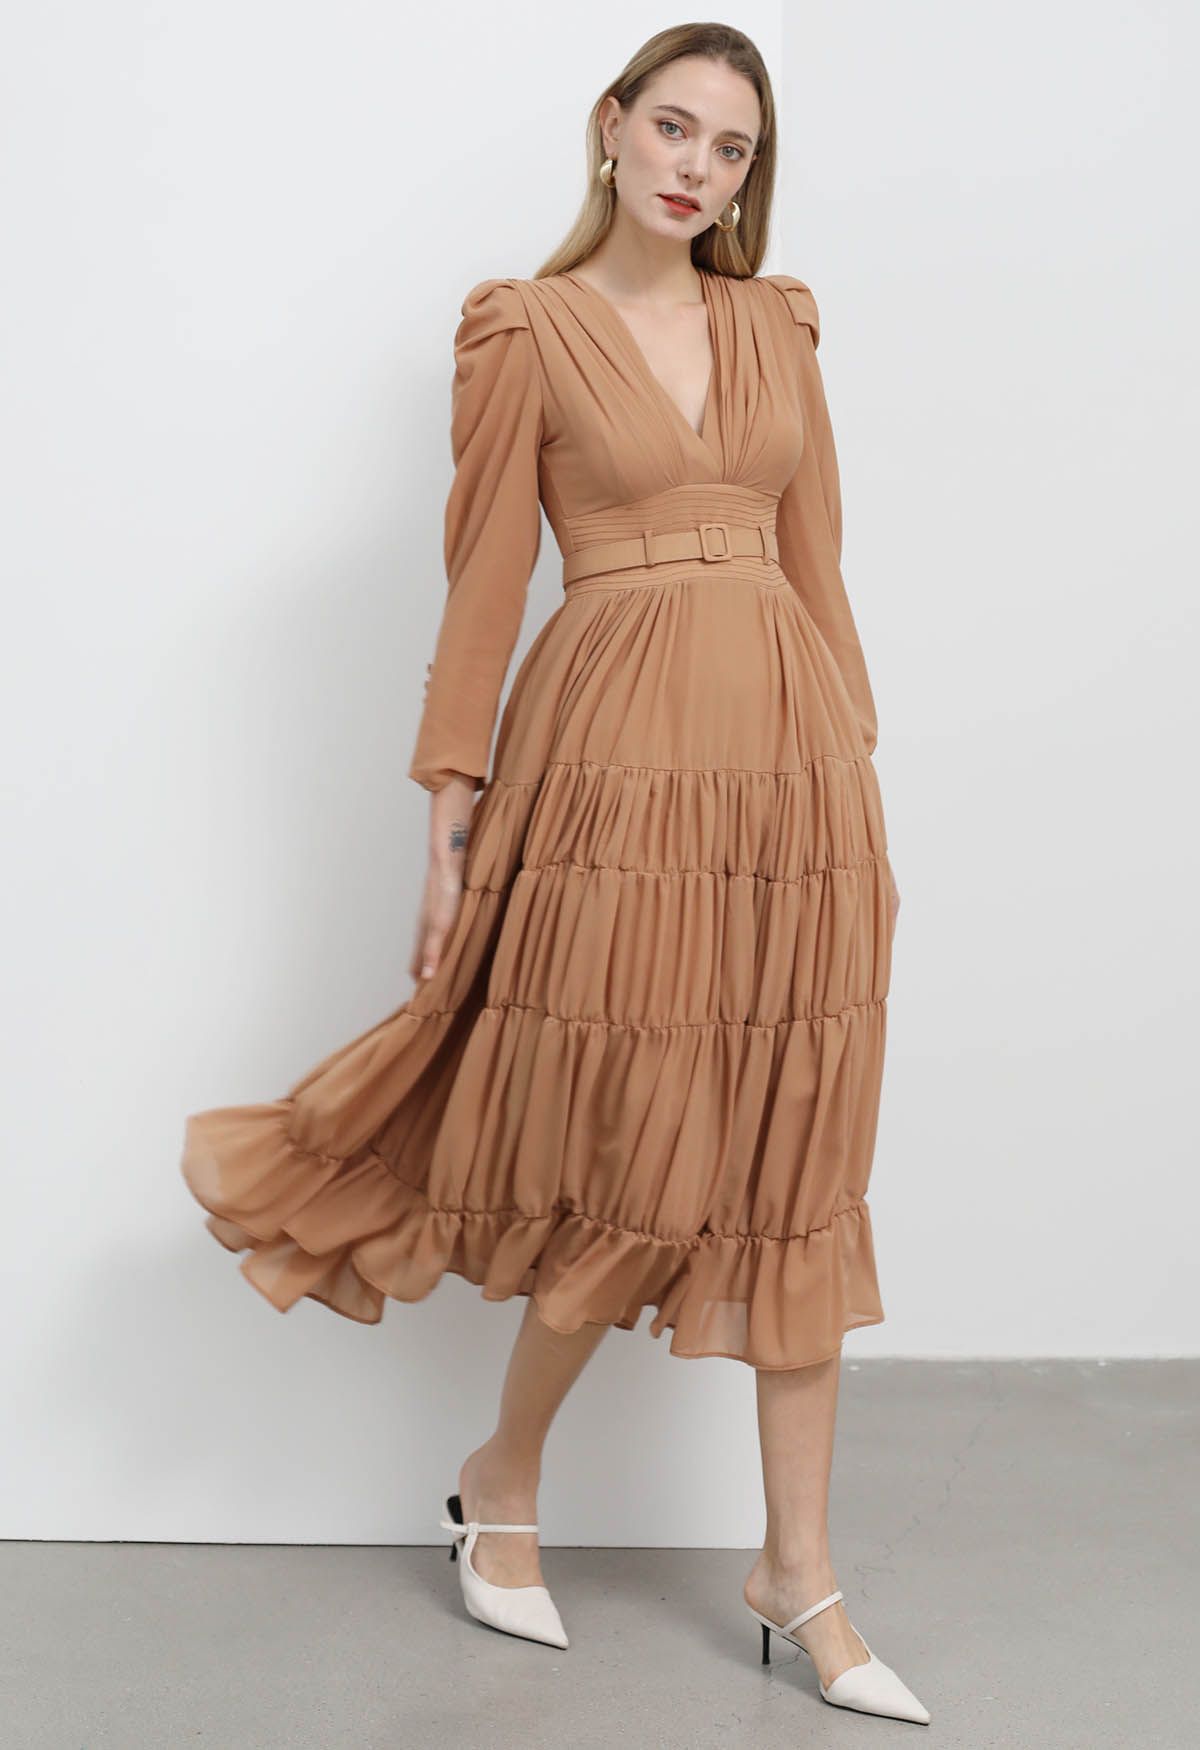 V-Neck Shirred Tiered Belted Chiffon Dress in Apricot